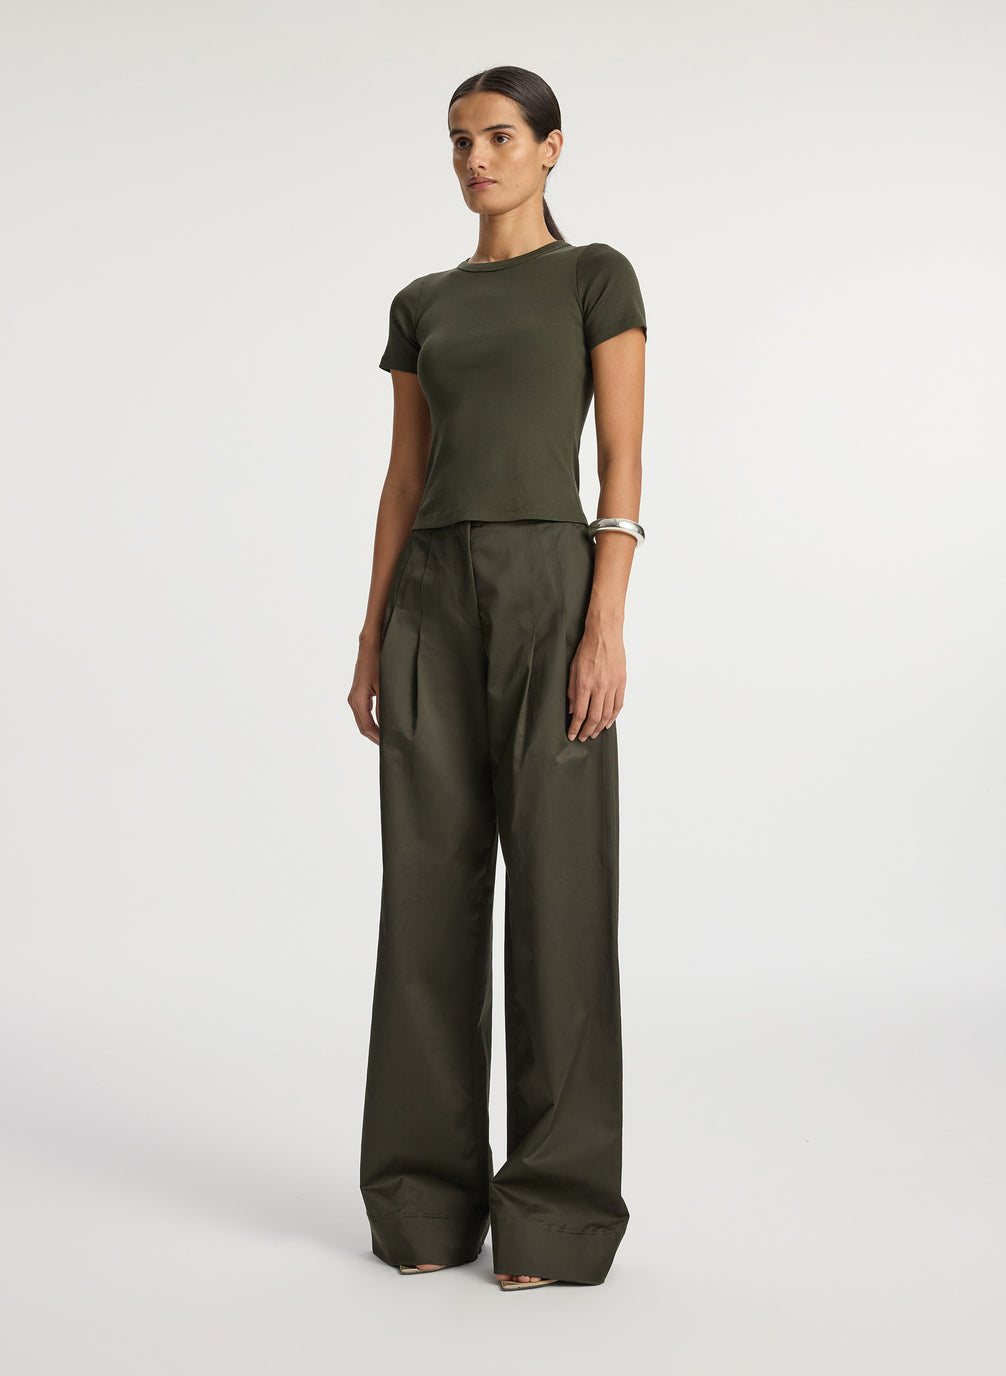 side  view of woman wearing olive green tshirt and olive green wide leg pants